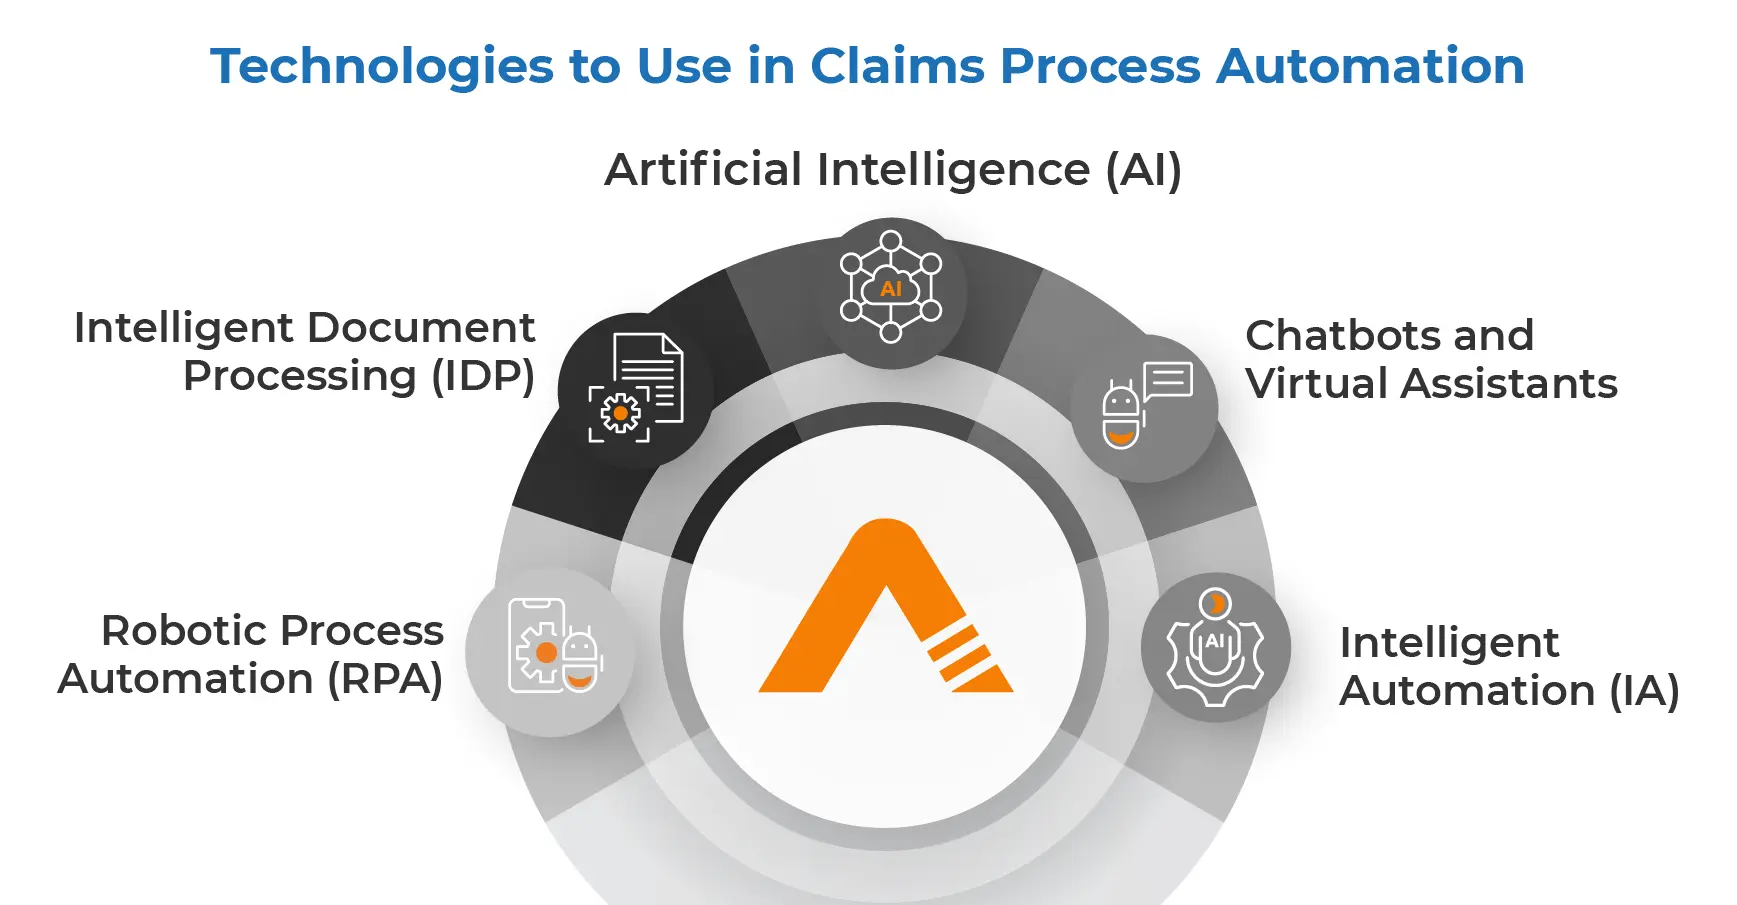 Technologies to Use in Claims Process Automation